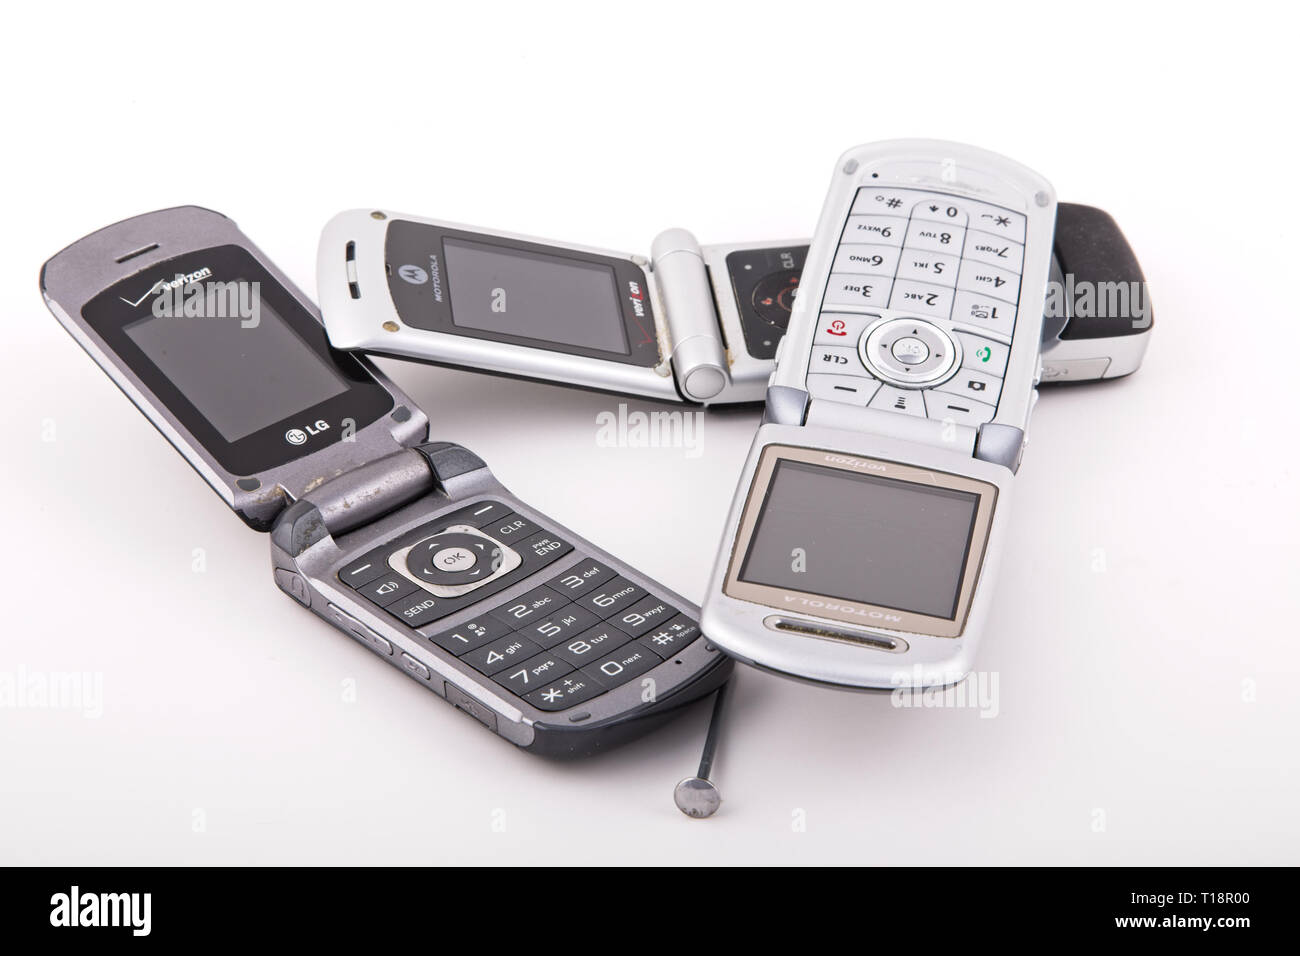 Old Classic Flip Style Cell Phones on White Stock Photo